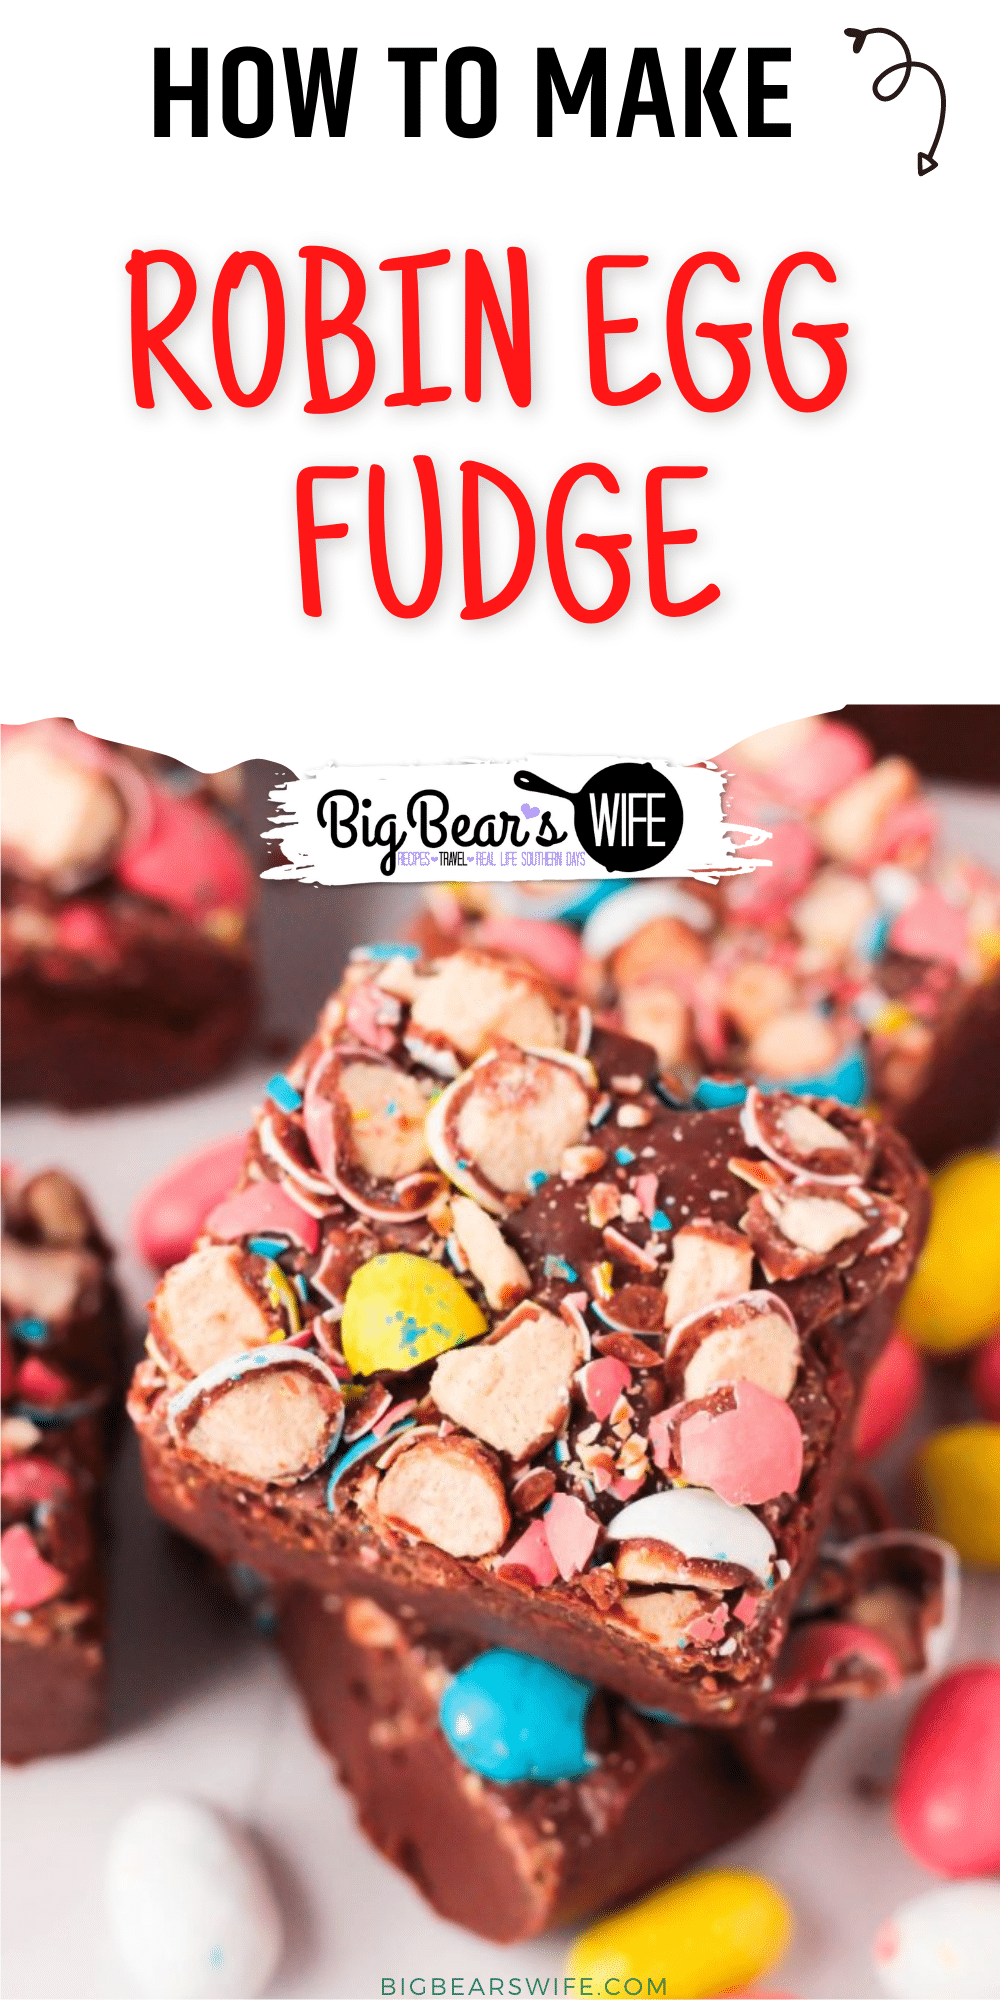 This 3 ingredient Robin Egg fudge is perfect for Easter or any Spring get together! It takes minute to make and it'll become a recipe keeper instantly!  via @bigbearswife